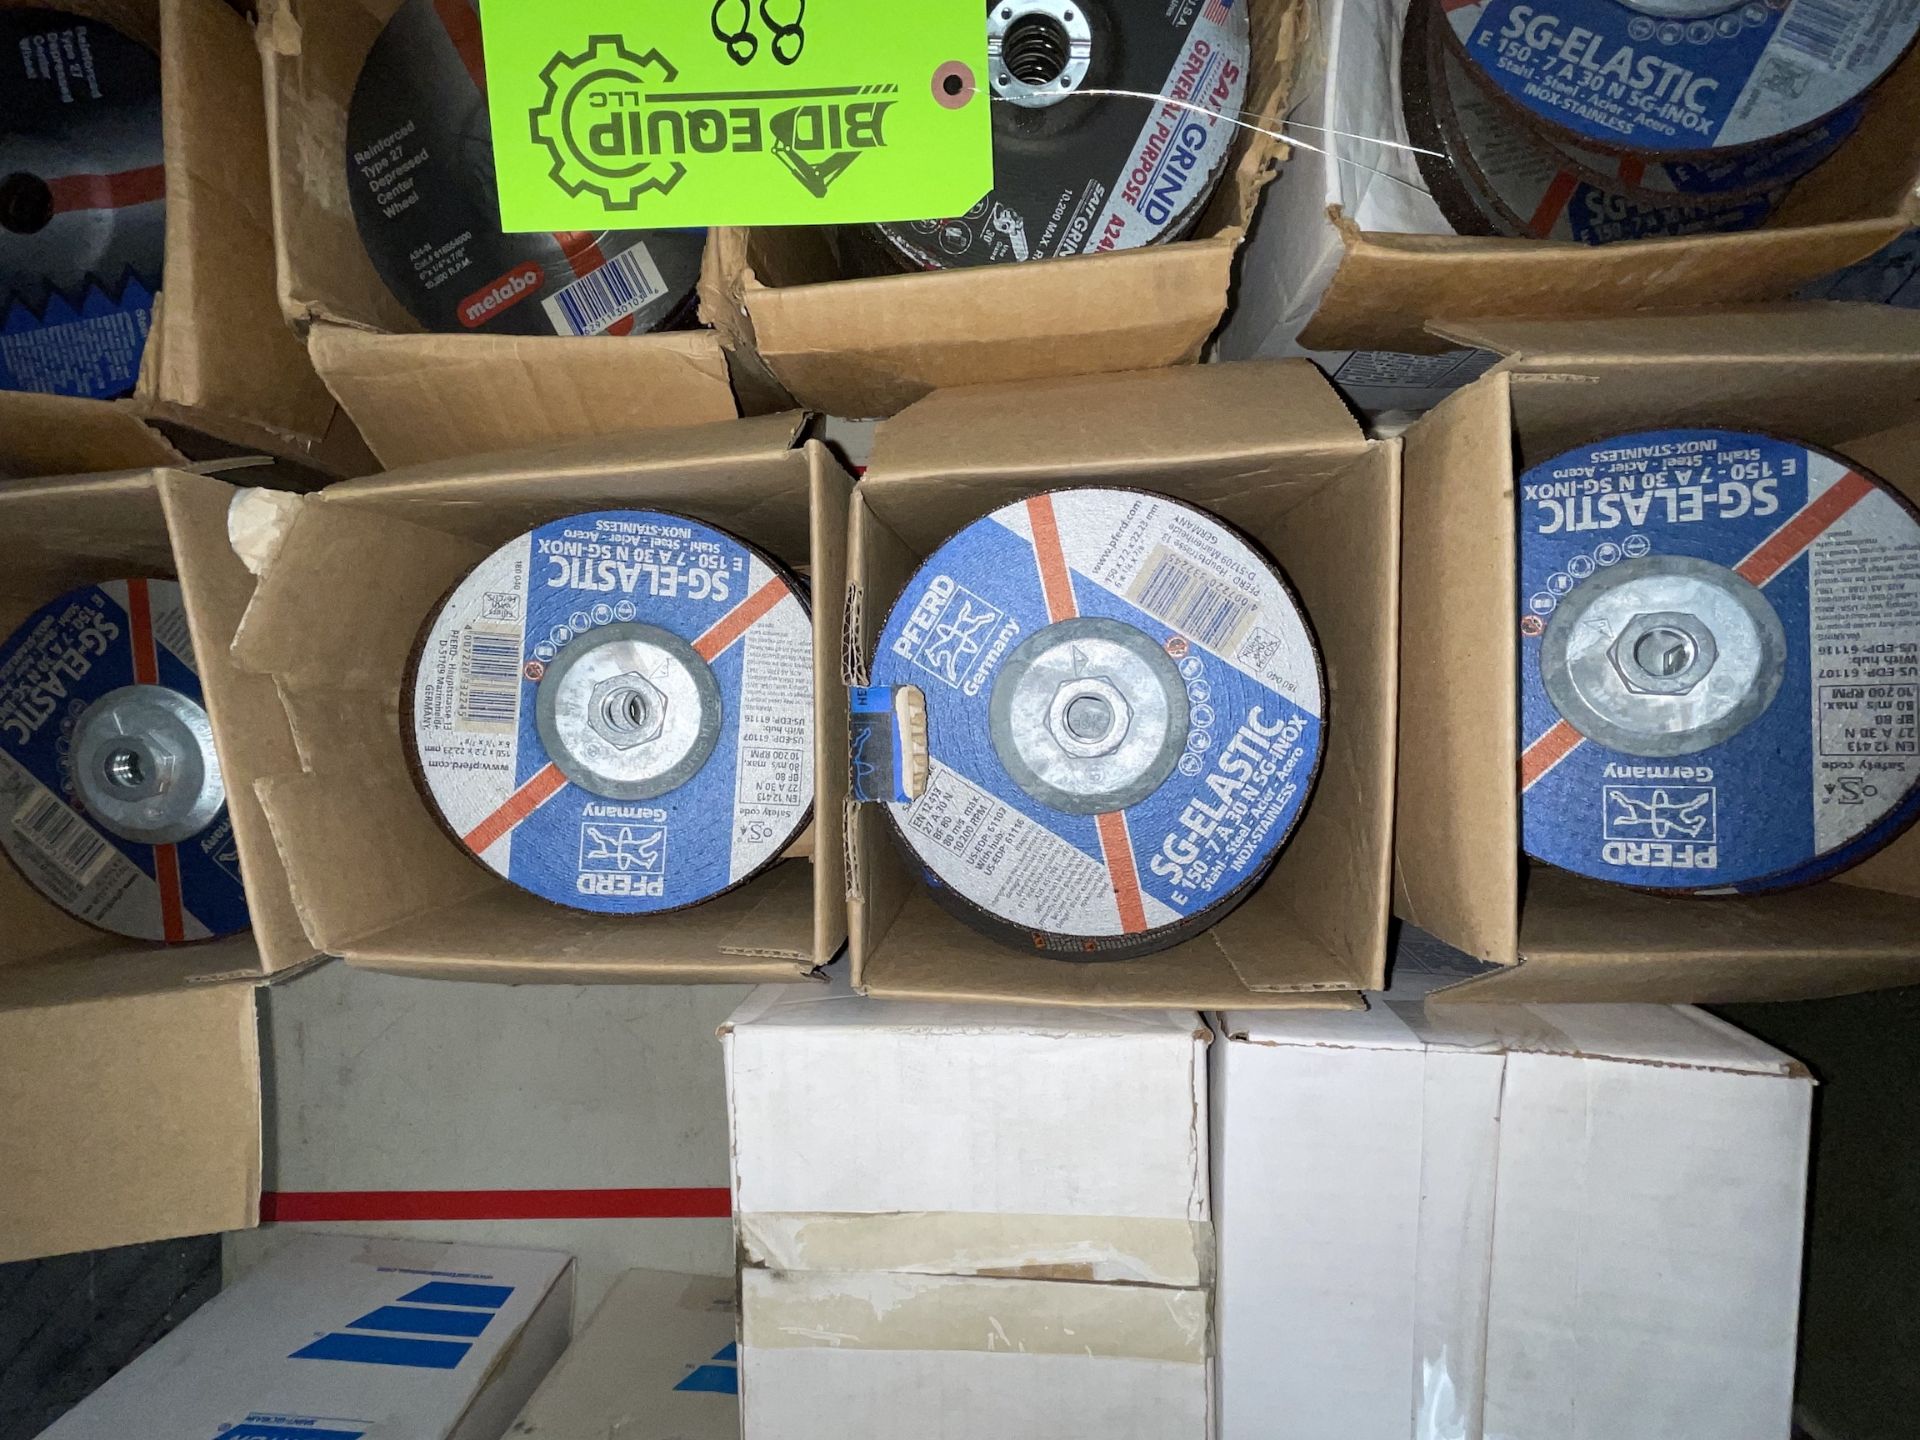 Lot of Grinding Wheels - Upland